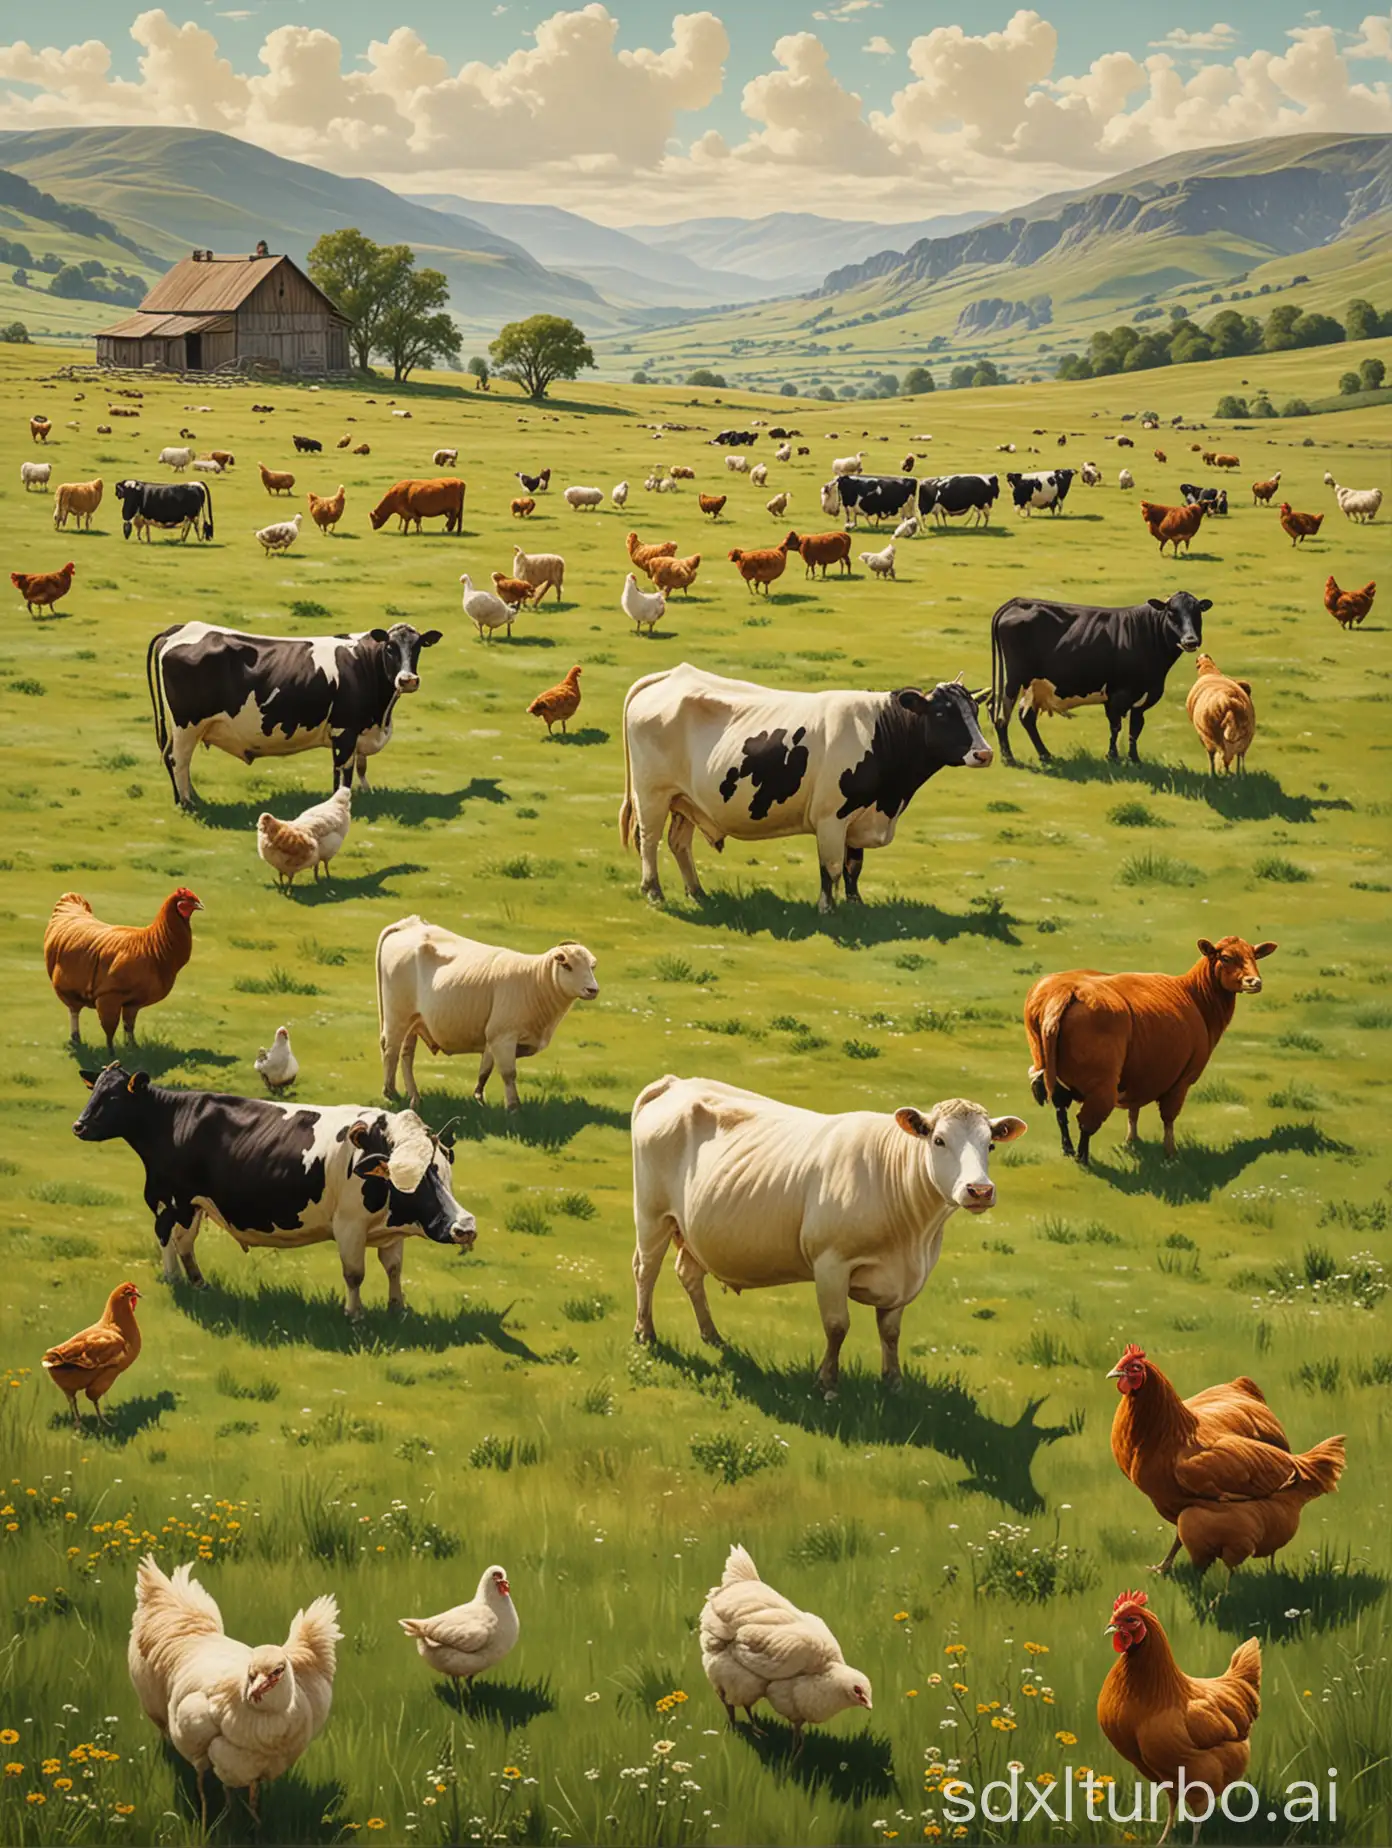 A poster with cows, sheep, and chickens on it in a grassland